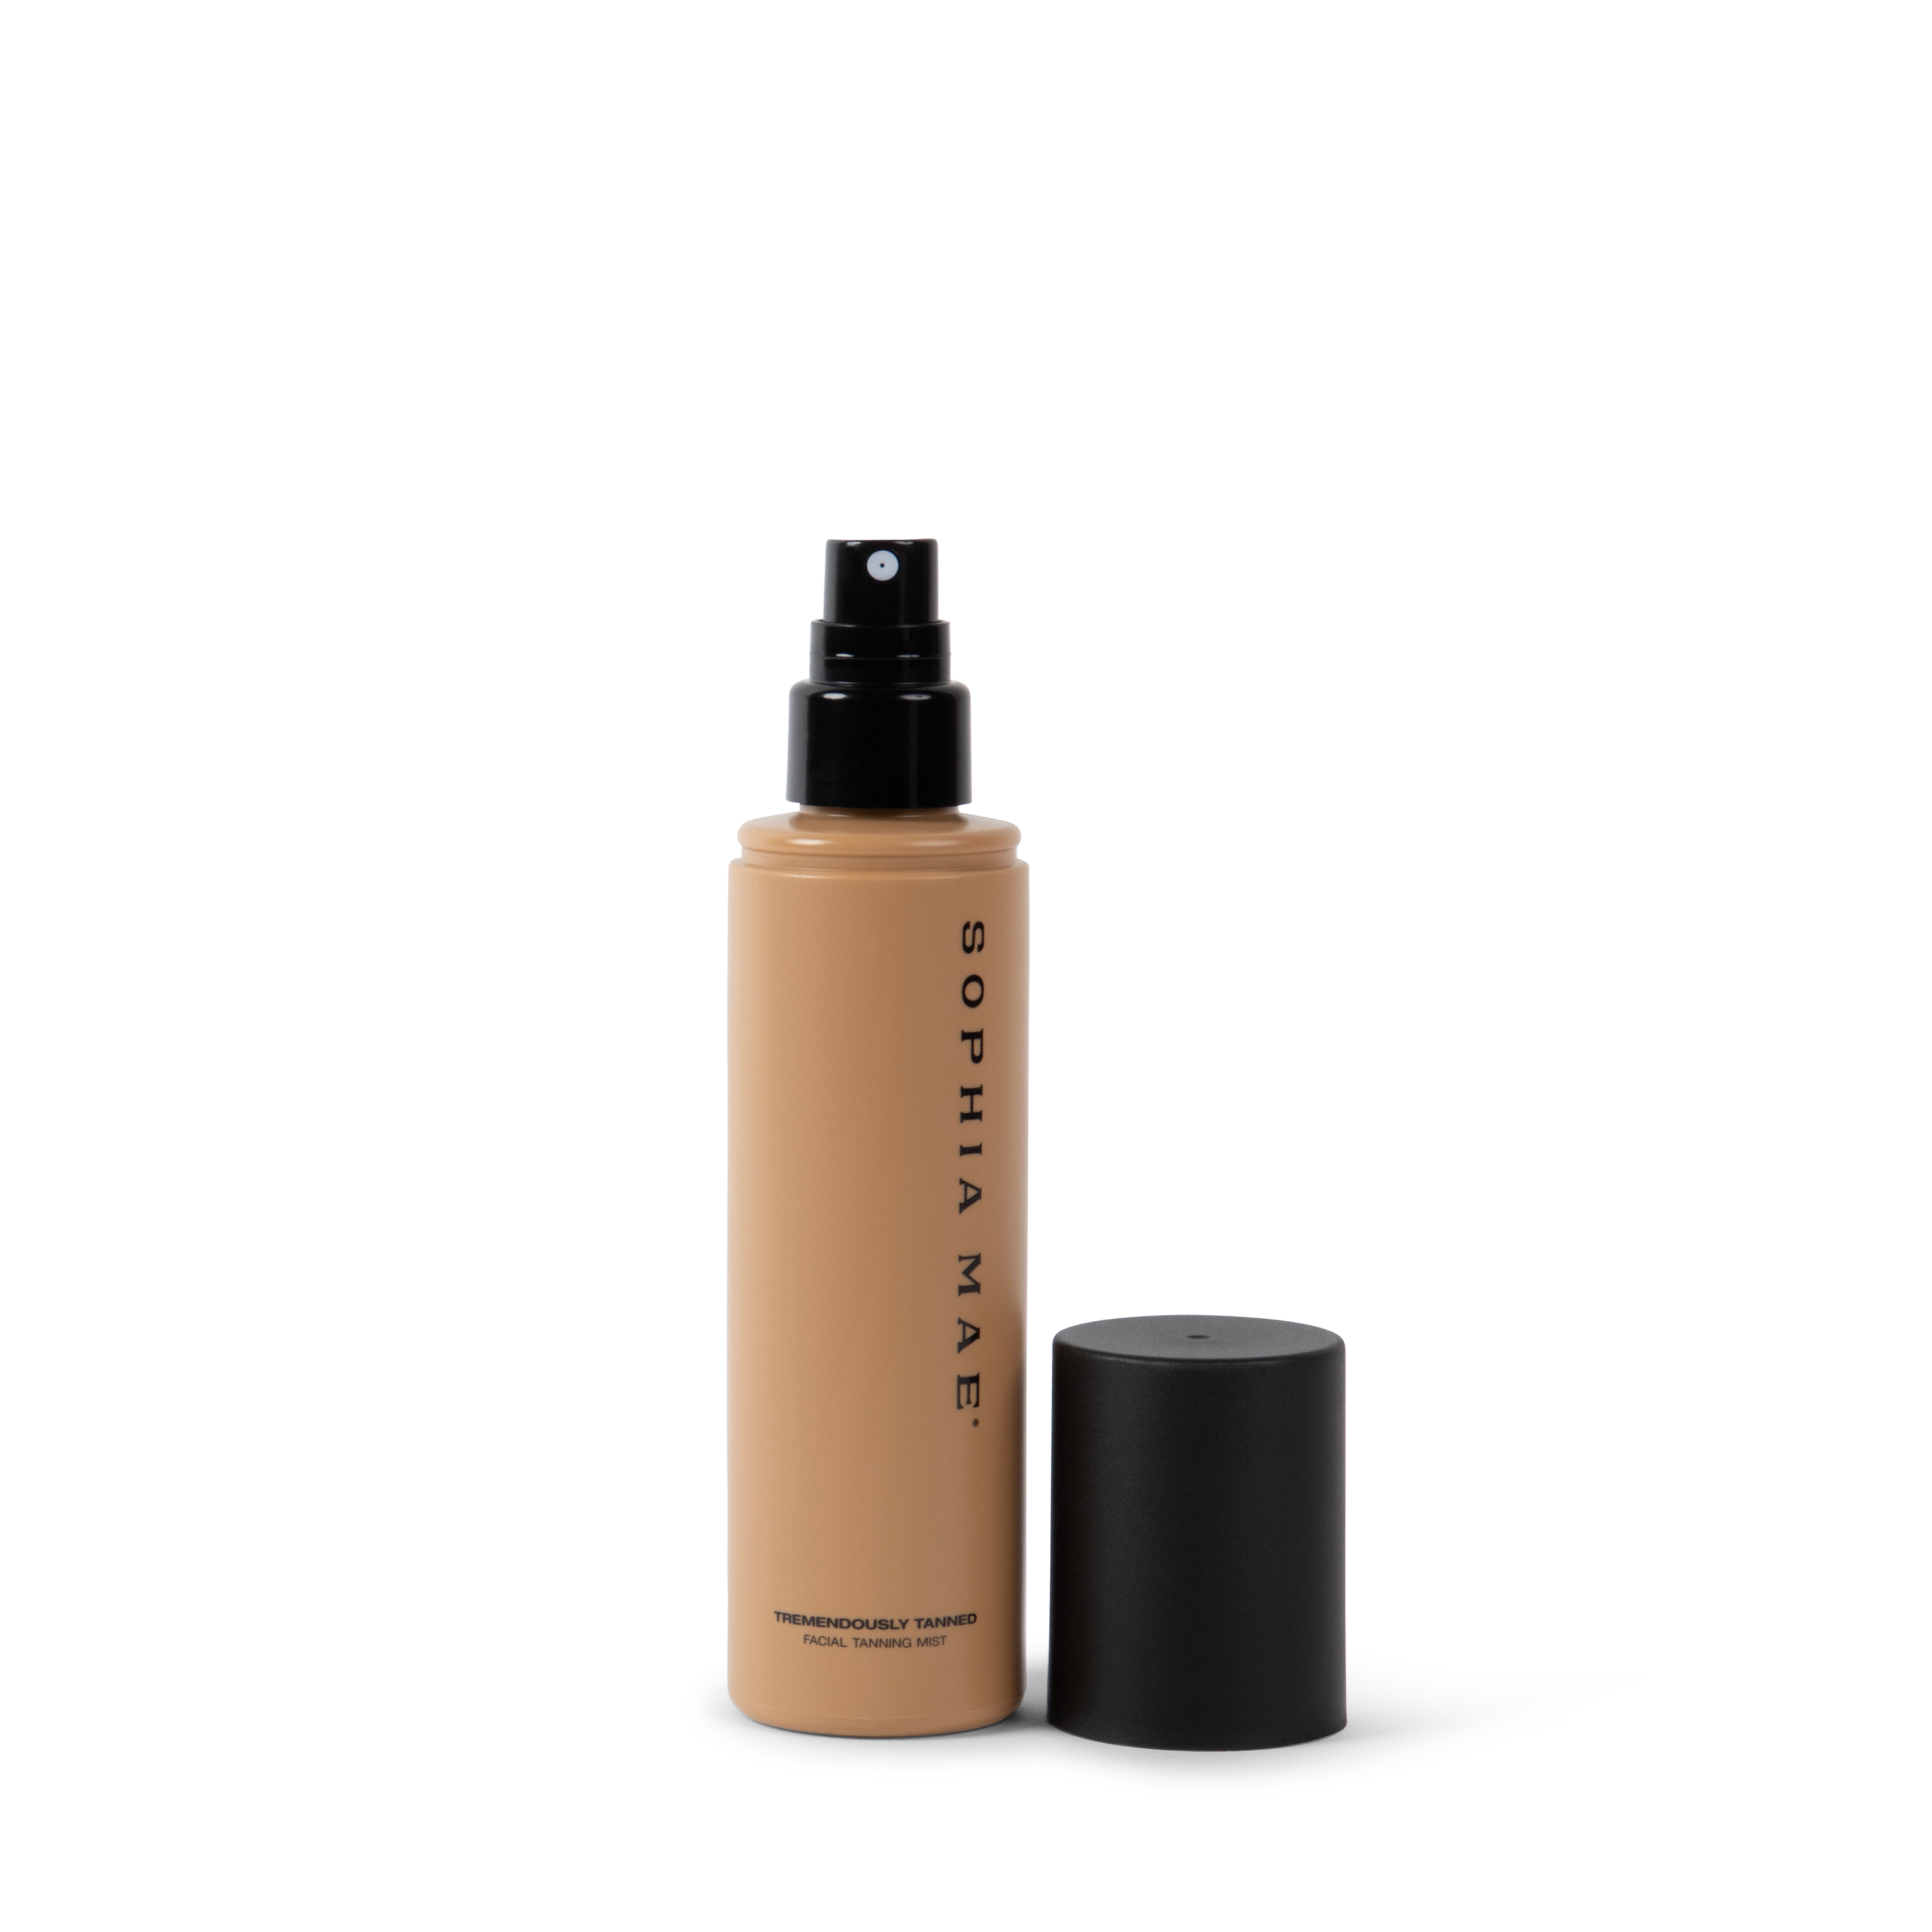 TREMENDOUSLY TANNED FACIAL TANNING MIST | SOPHIA MAE by Monica Geuze